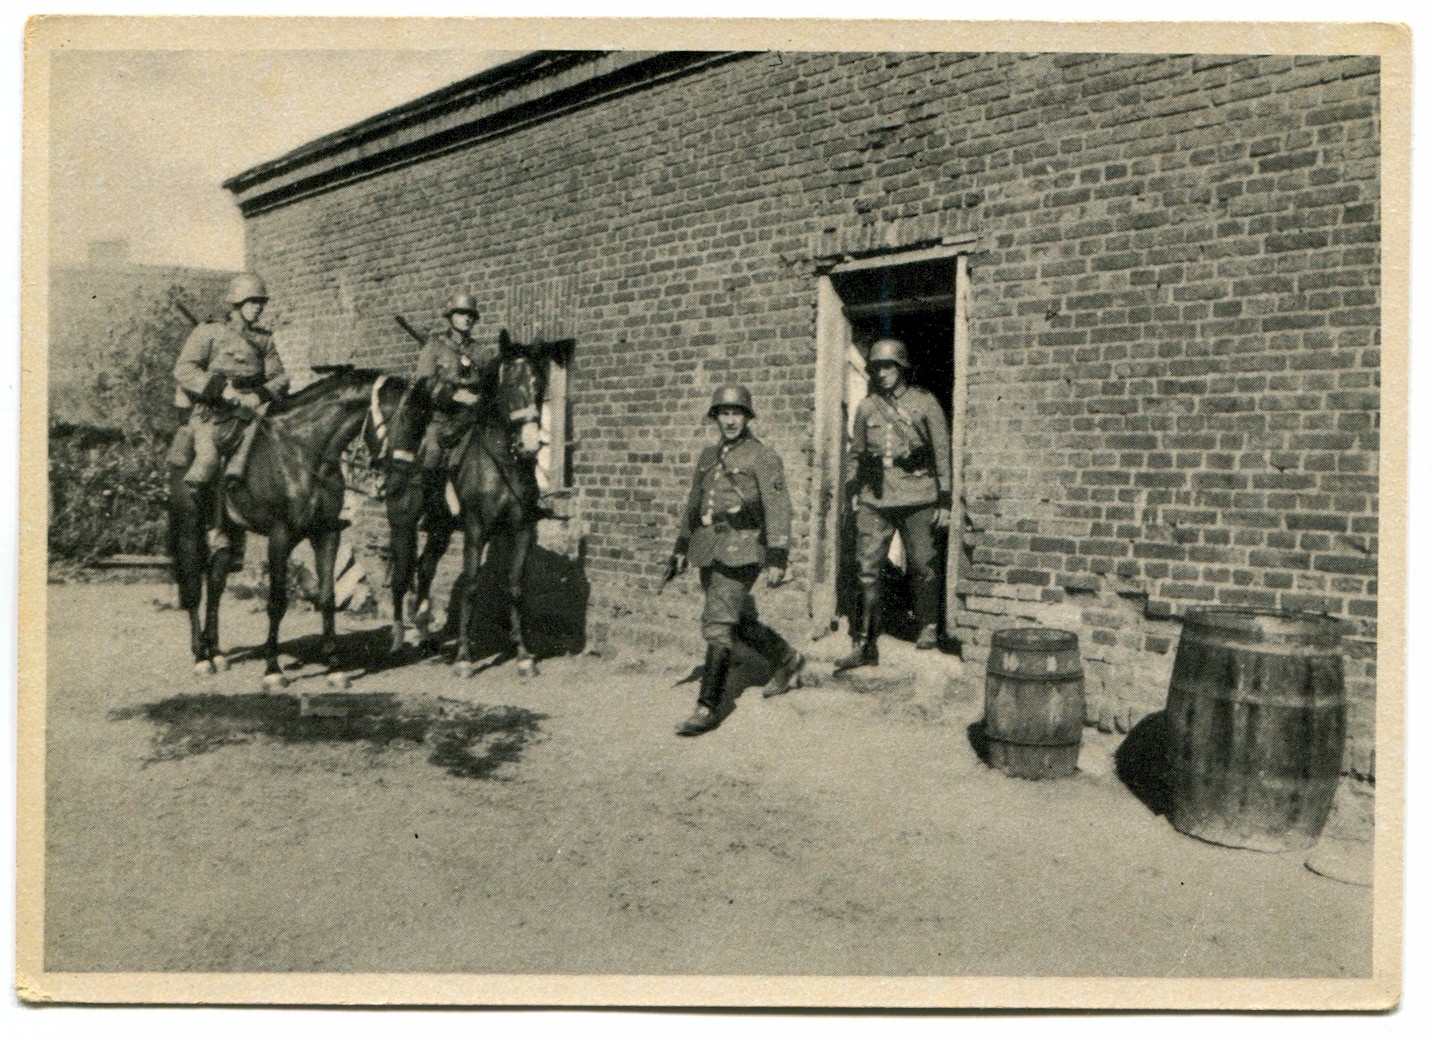 SS POST CARD POLICE IN POLAND"MOUNTED POLICE PATROL CLEARS A FARMSTEAD OCCUPIED BY POLISH MURDERES AND ARSONISTS"